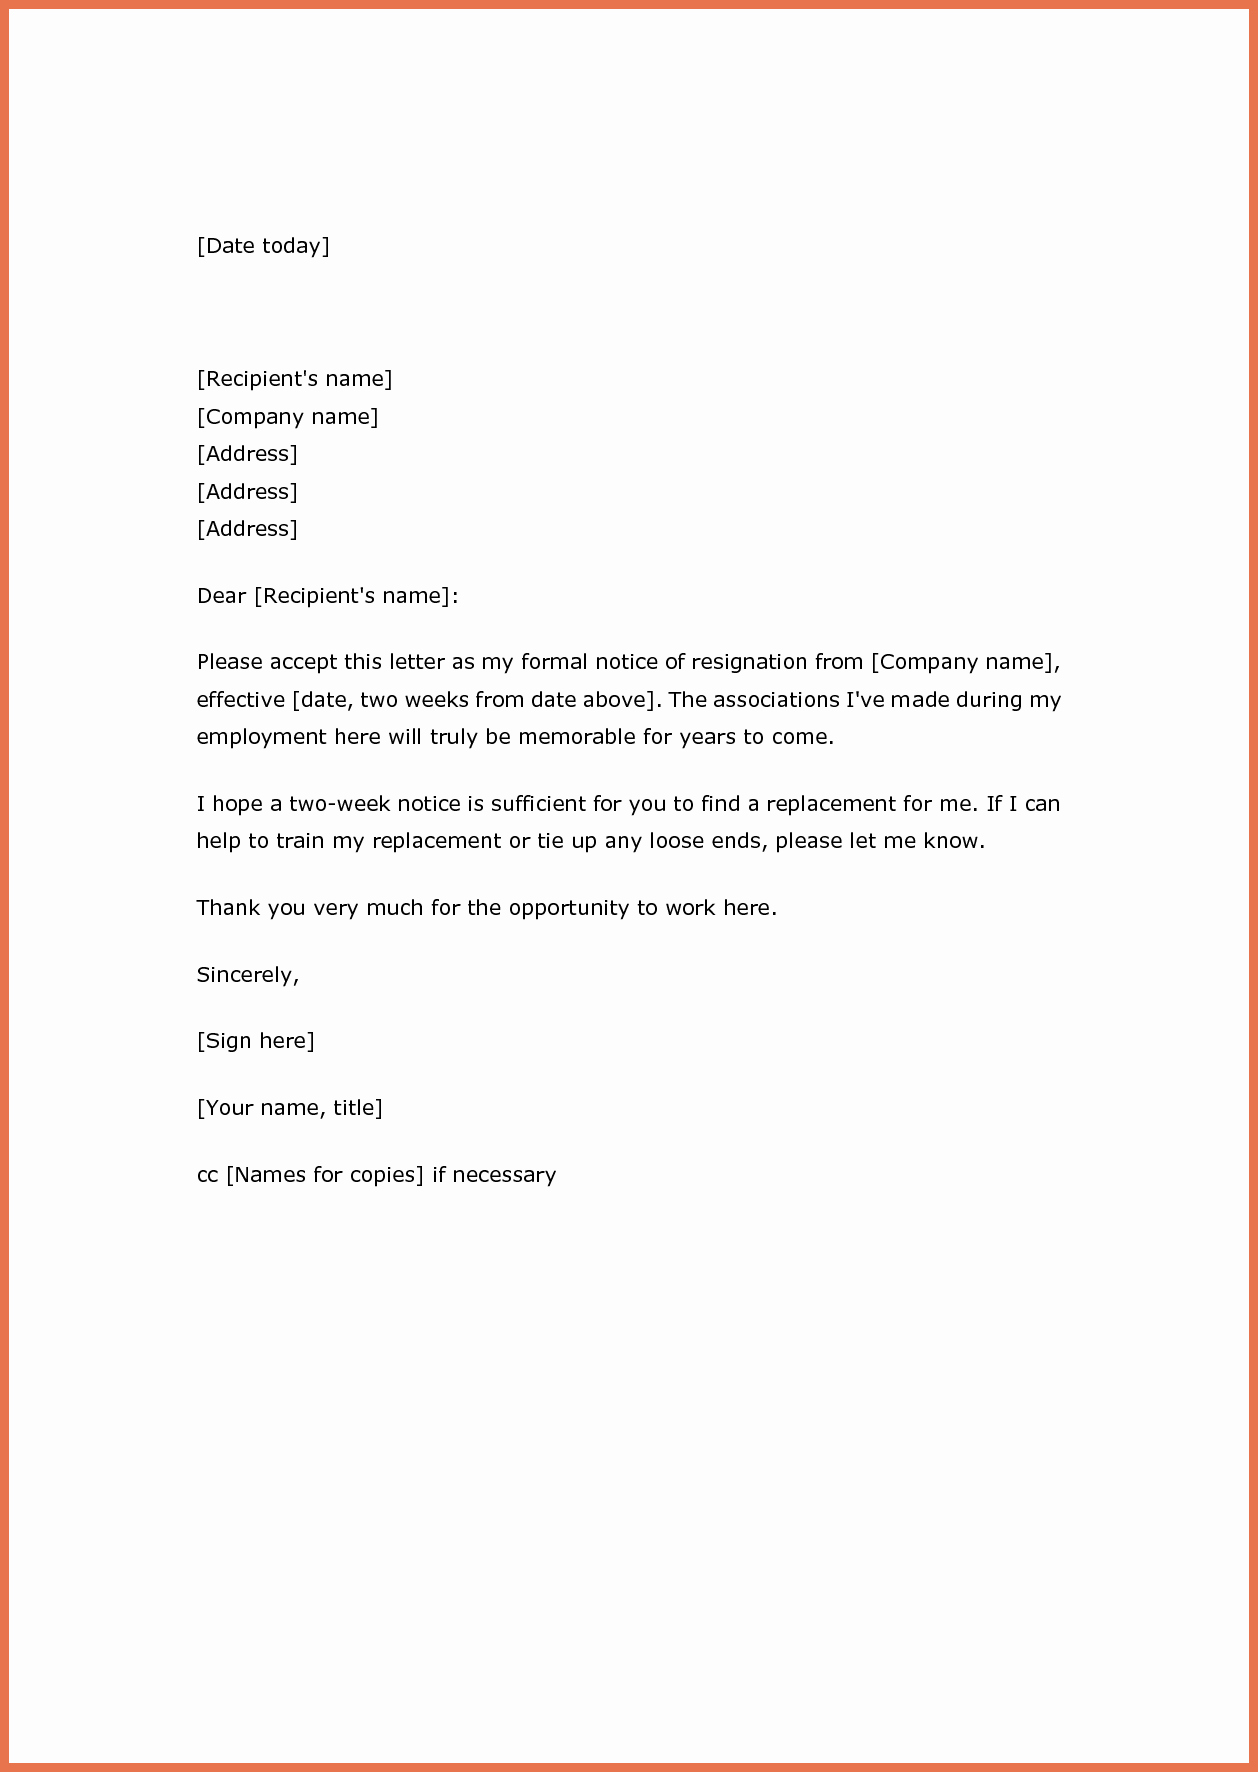 Resignation Letter Two Weeks Notice Fresh Two Weeks’ Notice Resignation Letter Samples